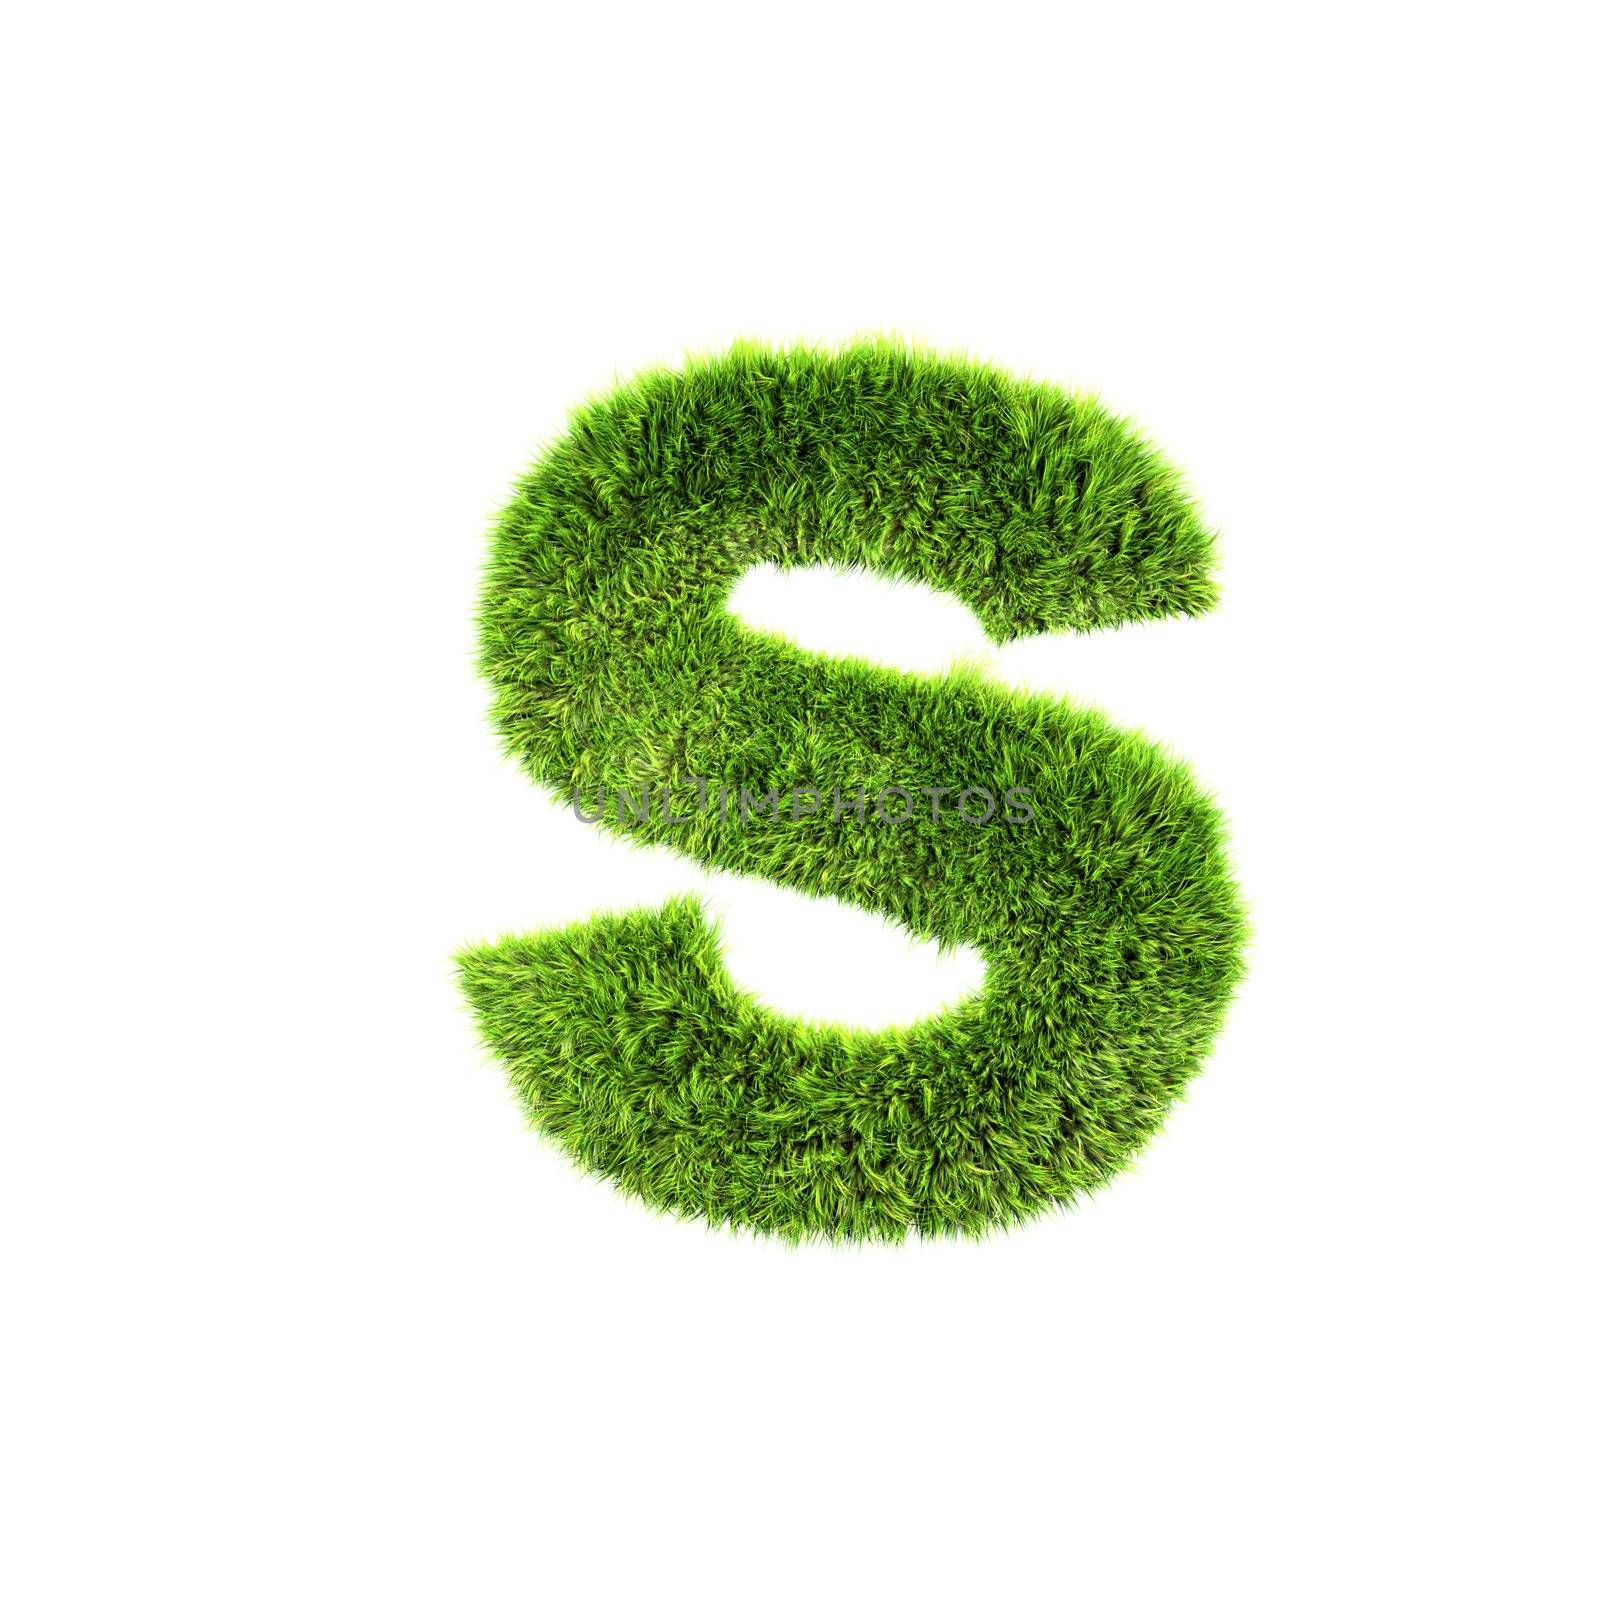 3d grass letter isolated on white background - s by chrisroll